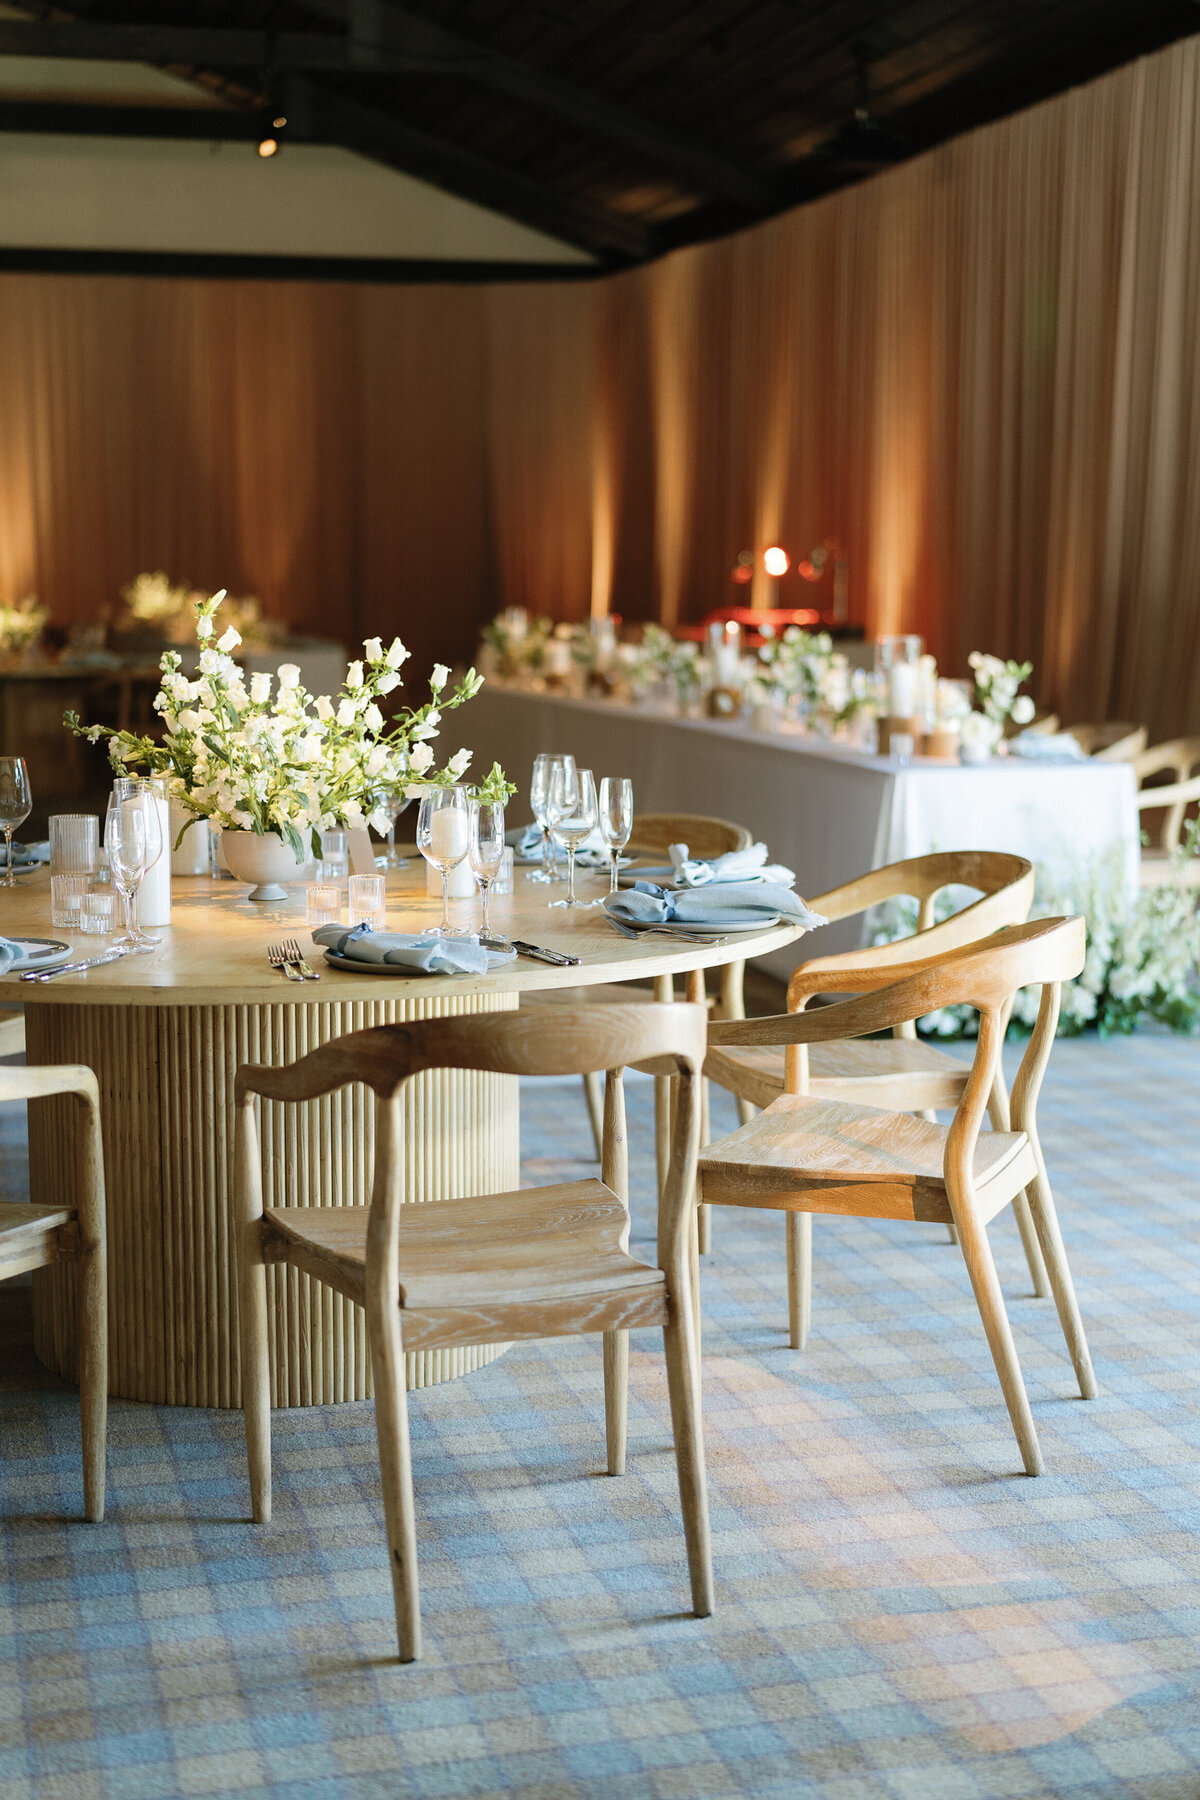 Modern wedding table design, light wood table and chairs, light blue napkins and delicate white flowers decorate the table.,